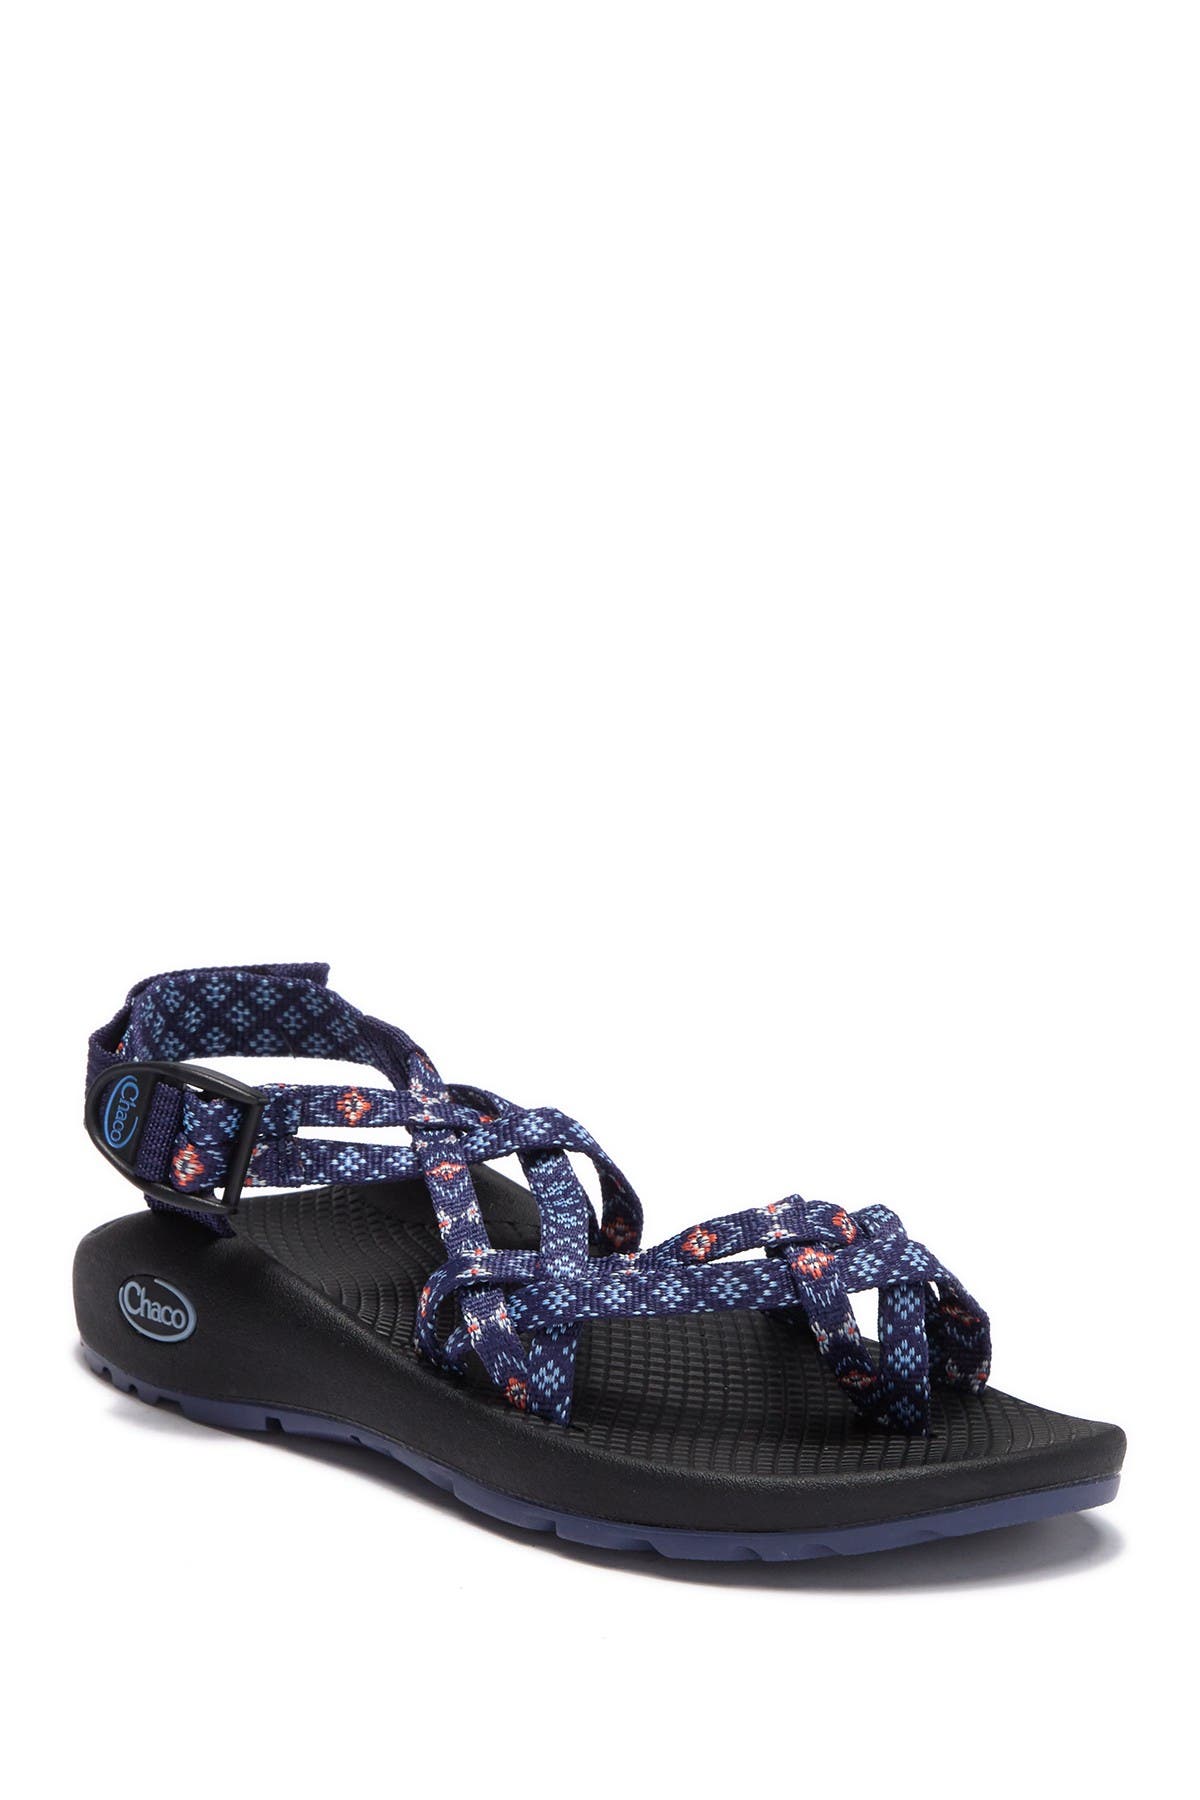 york violet chacos